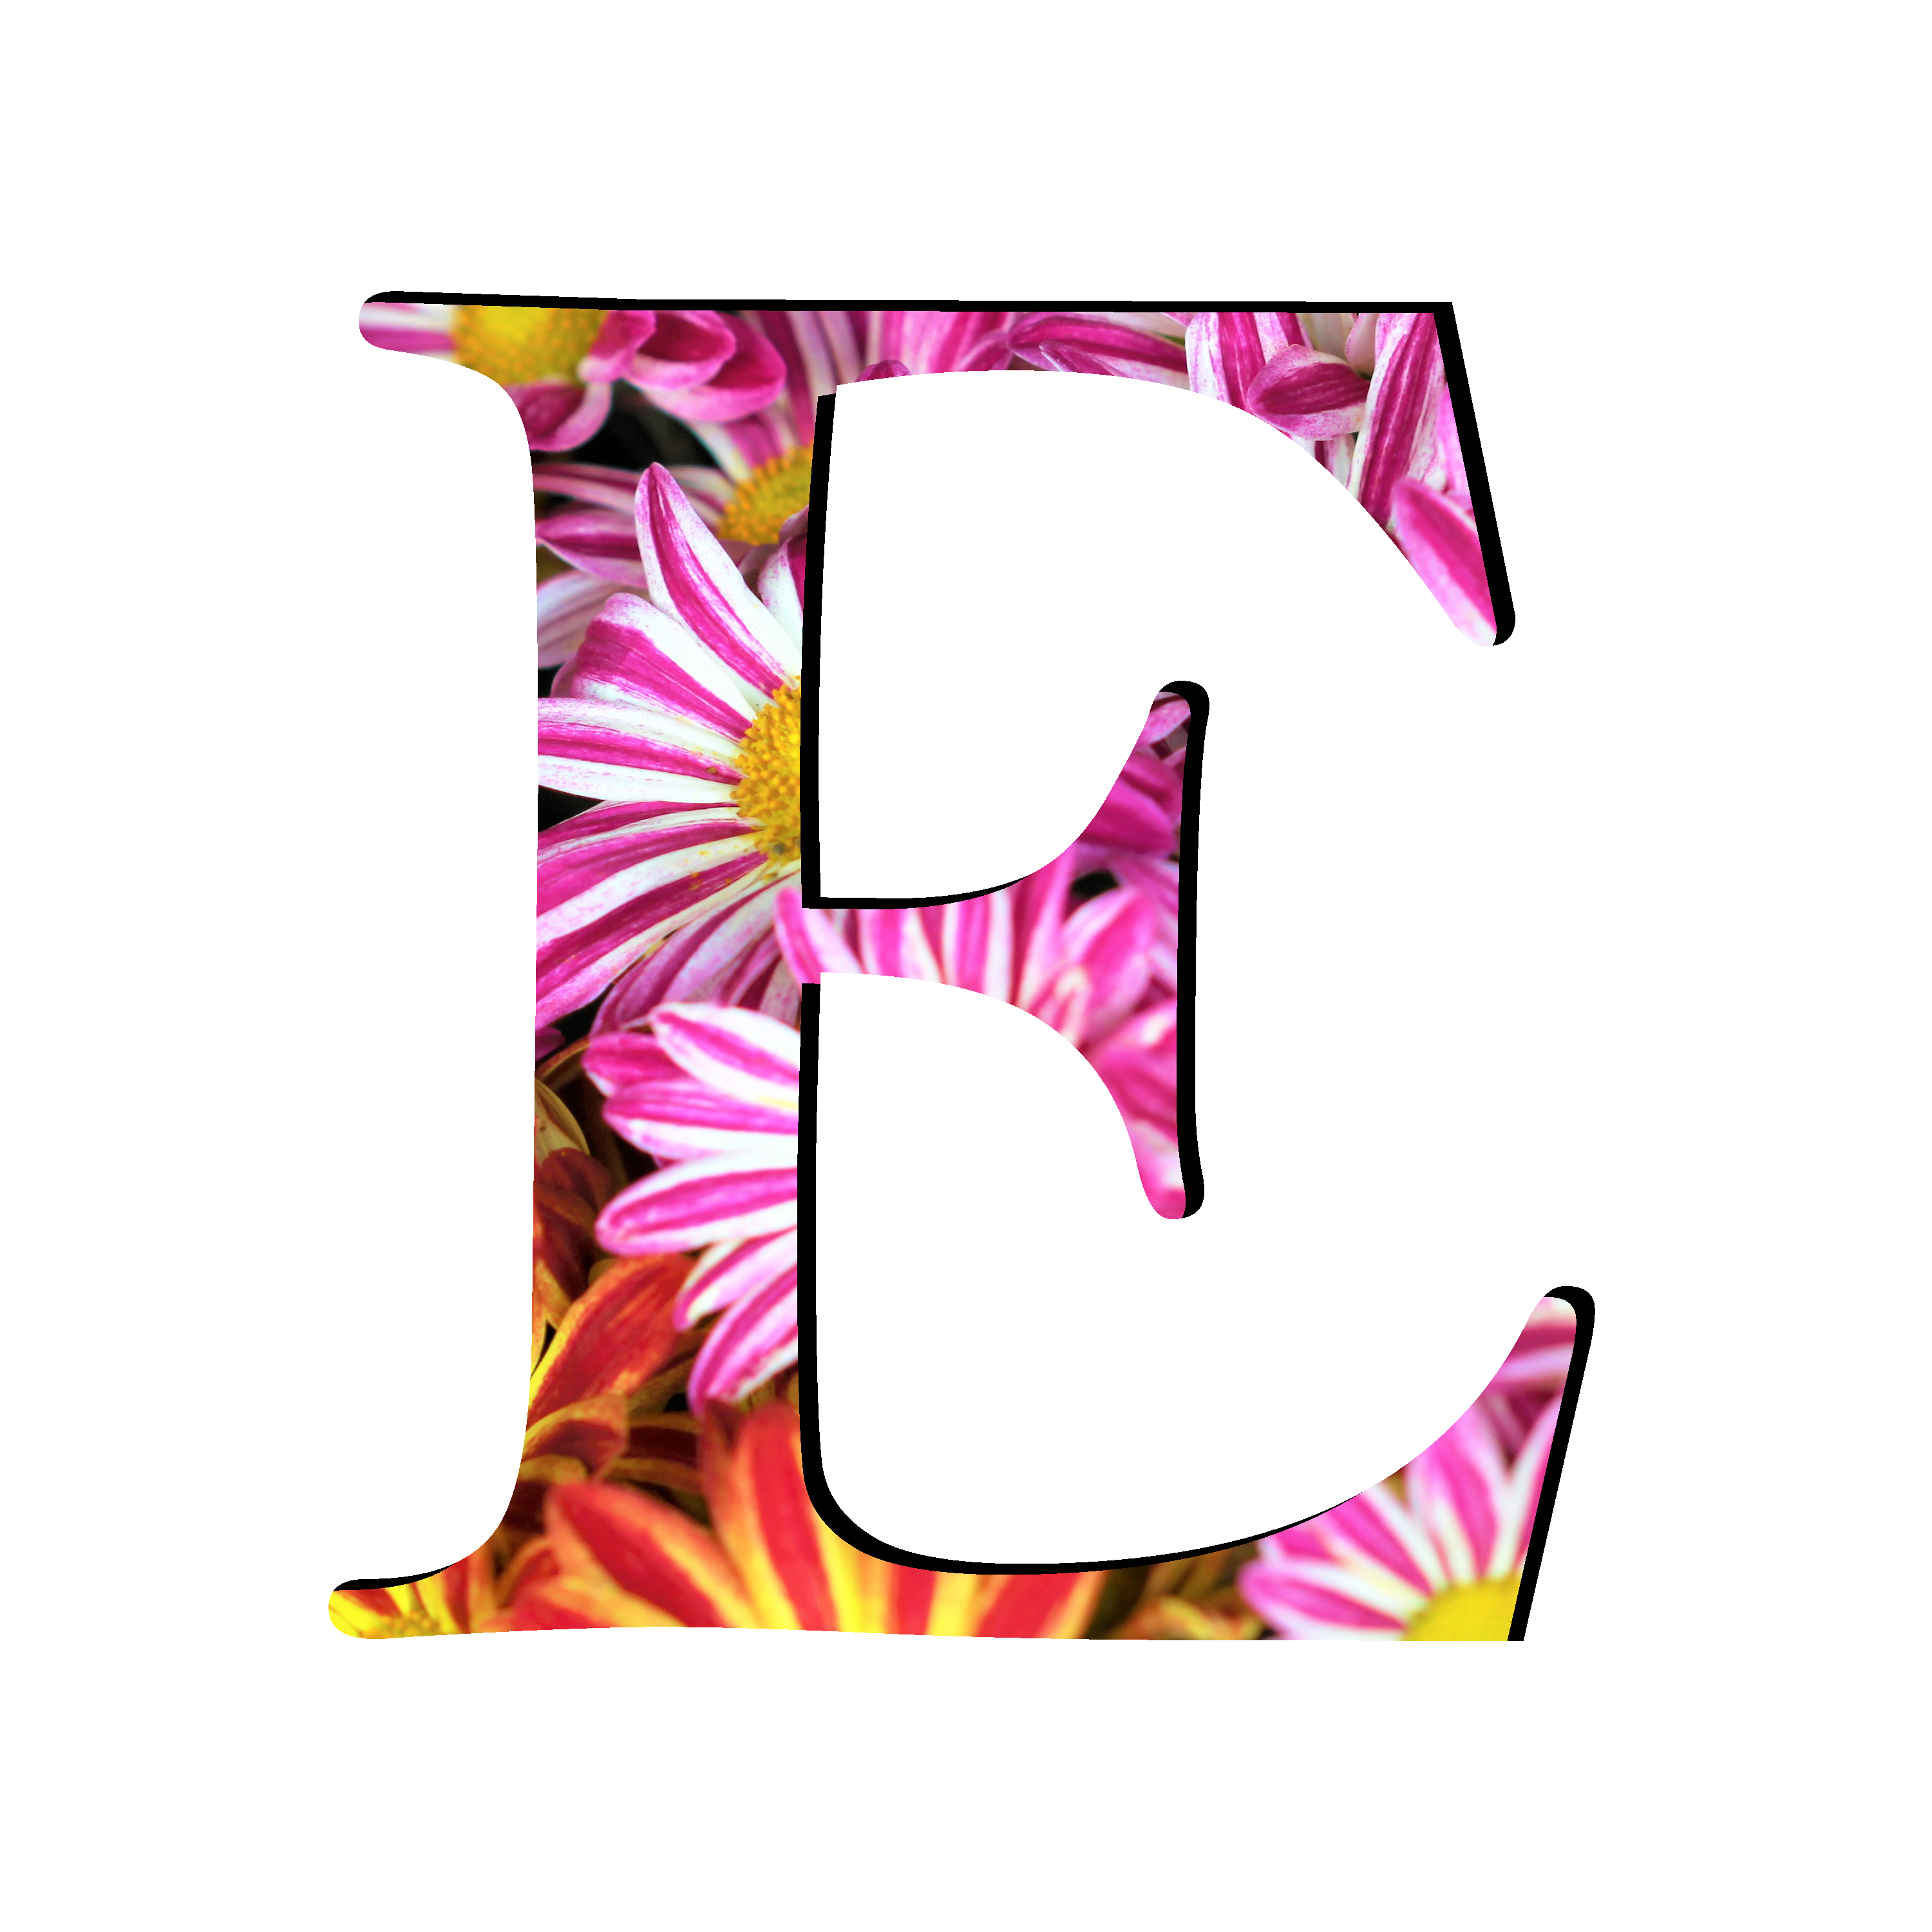 E Letter HD Image Free PNG Image